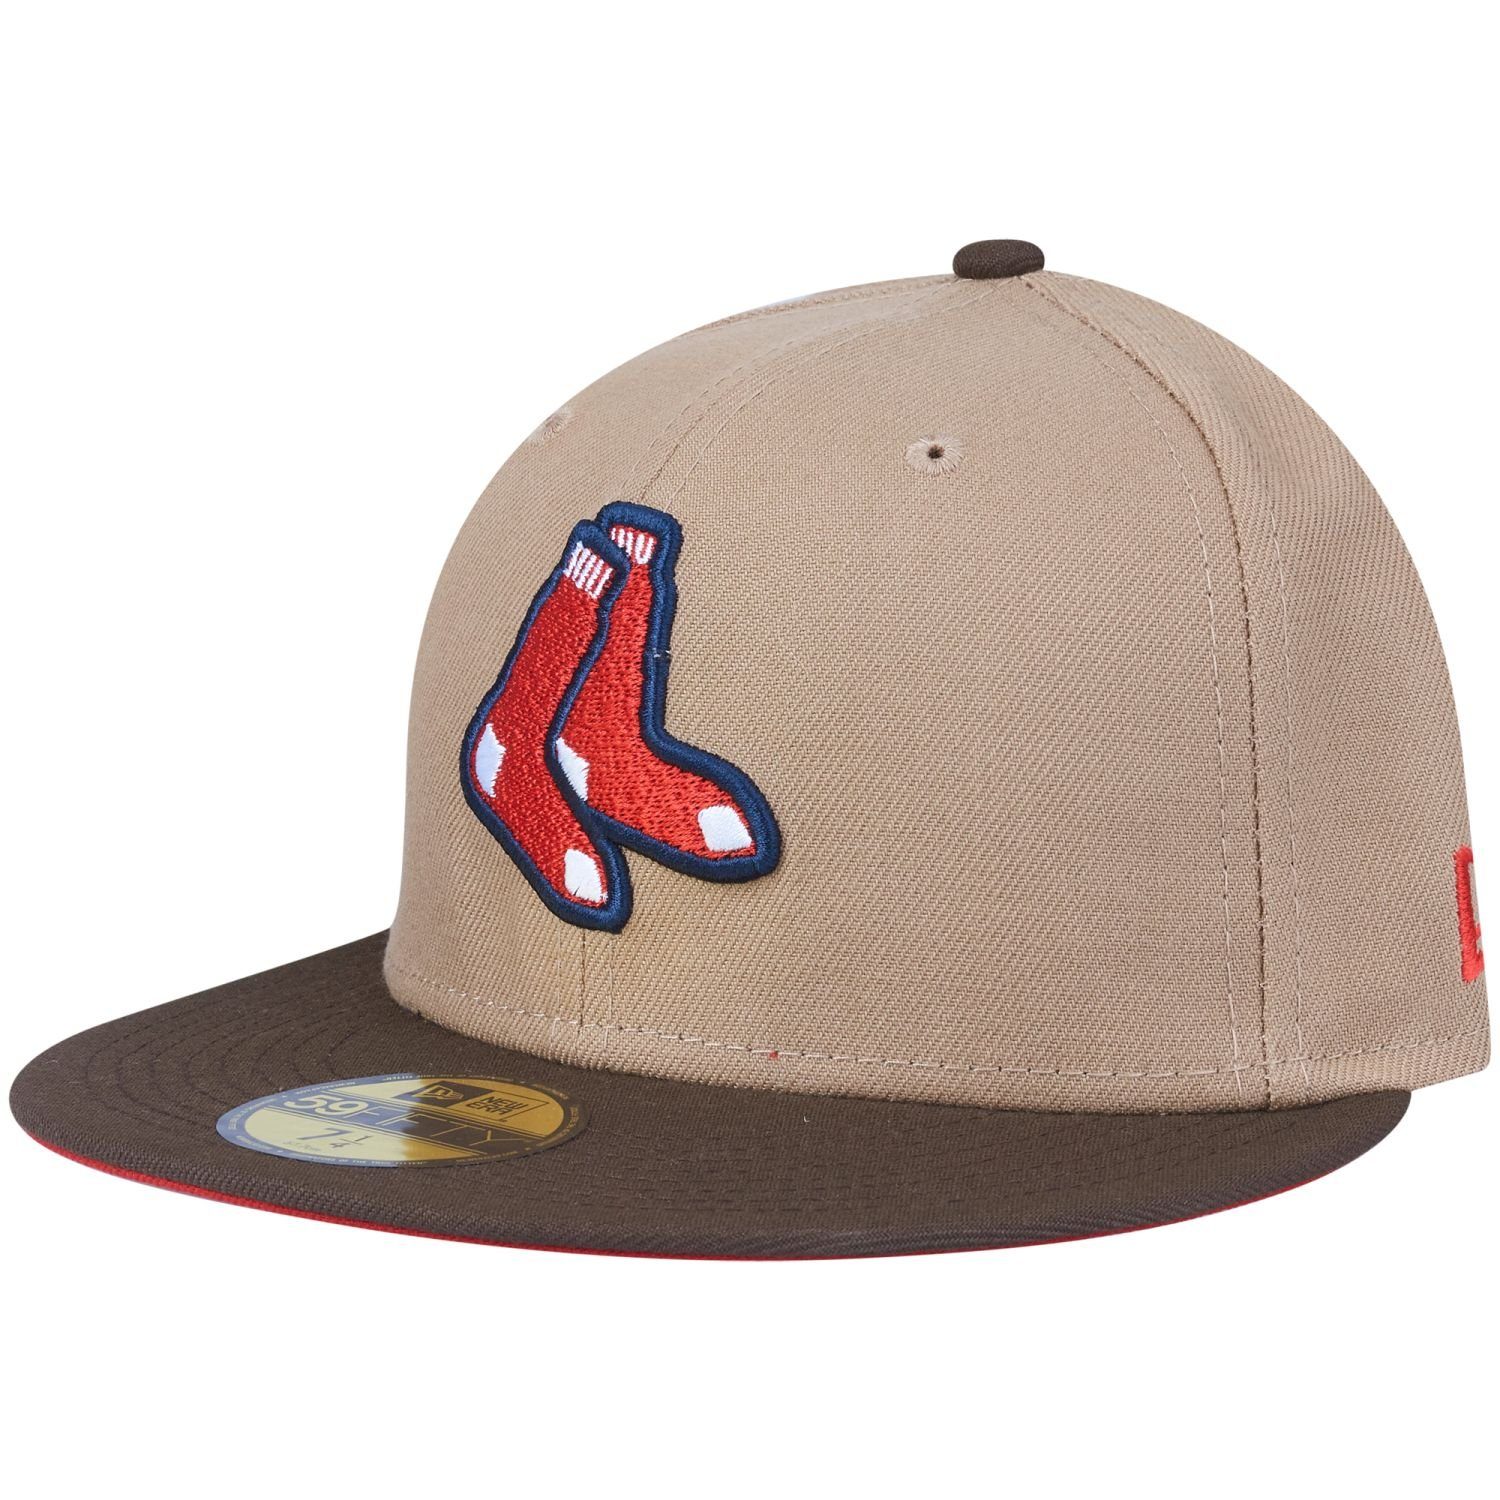 Fitted Red ASG New 59Fifty Sox Boston Era COOPERSTOWN Cap